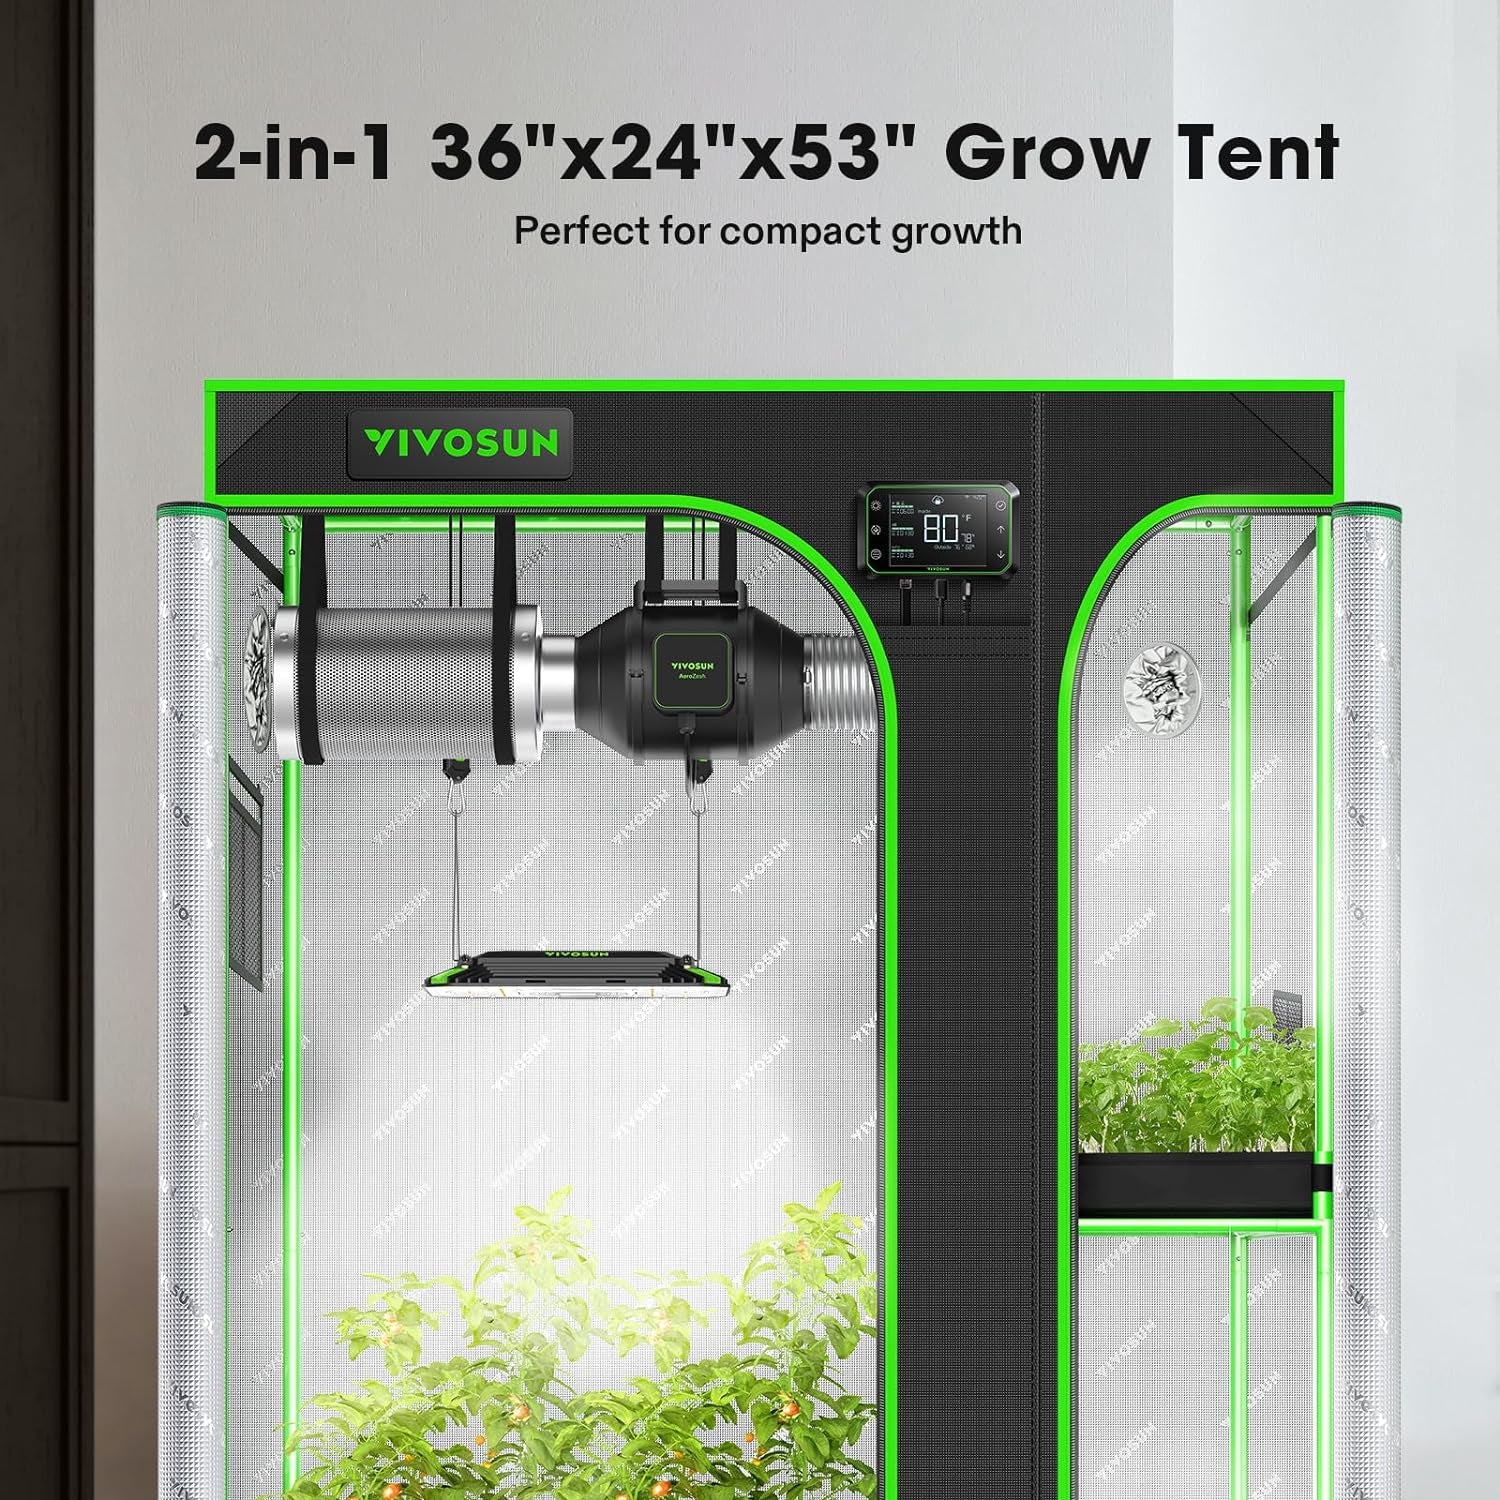 D325 2-In-1 3X2 Grow Tent, 36"X24"X53" High Reflective Mylar with Multi-Chamber and Floor Tray for Hydroponic Indoor Plant